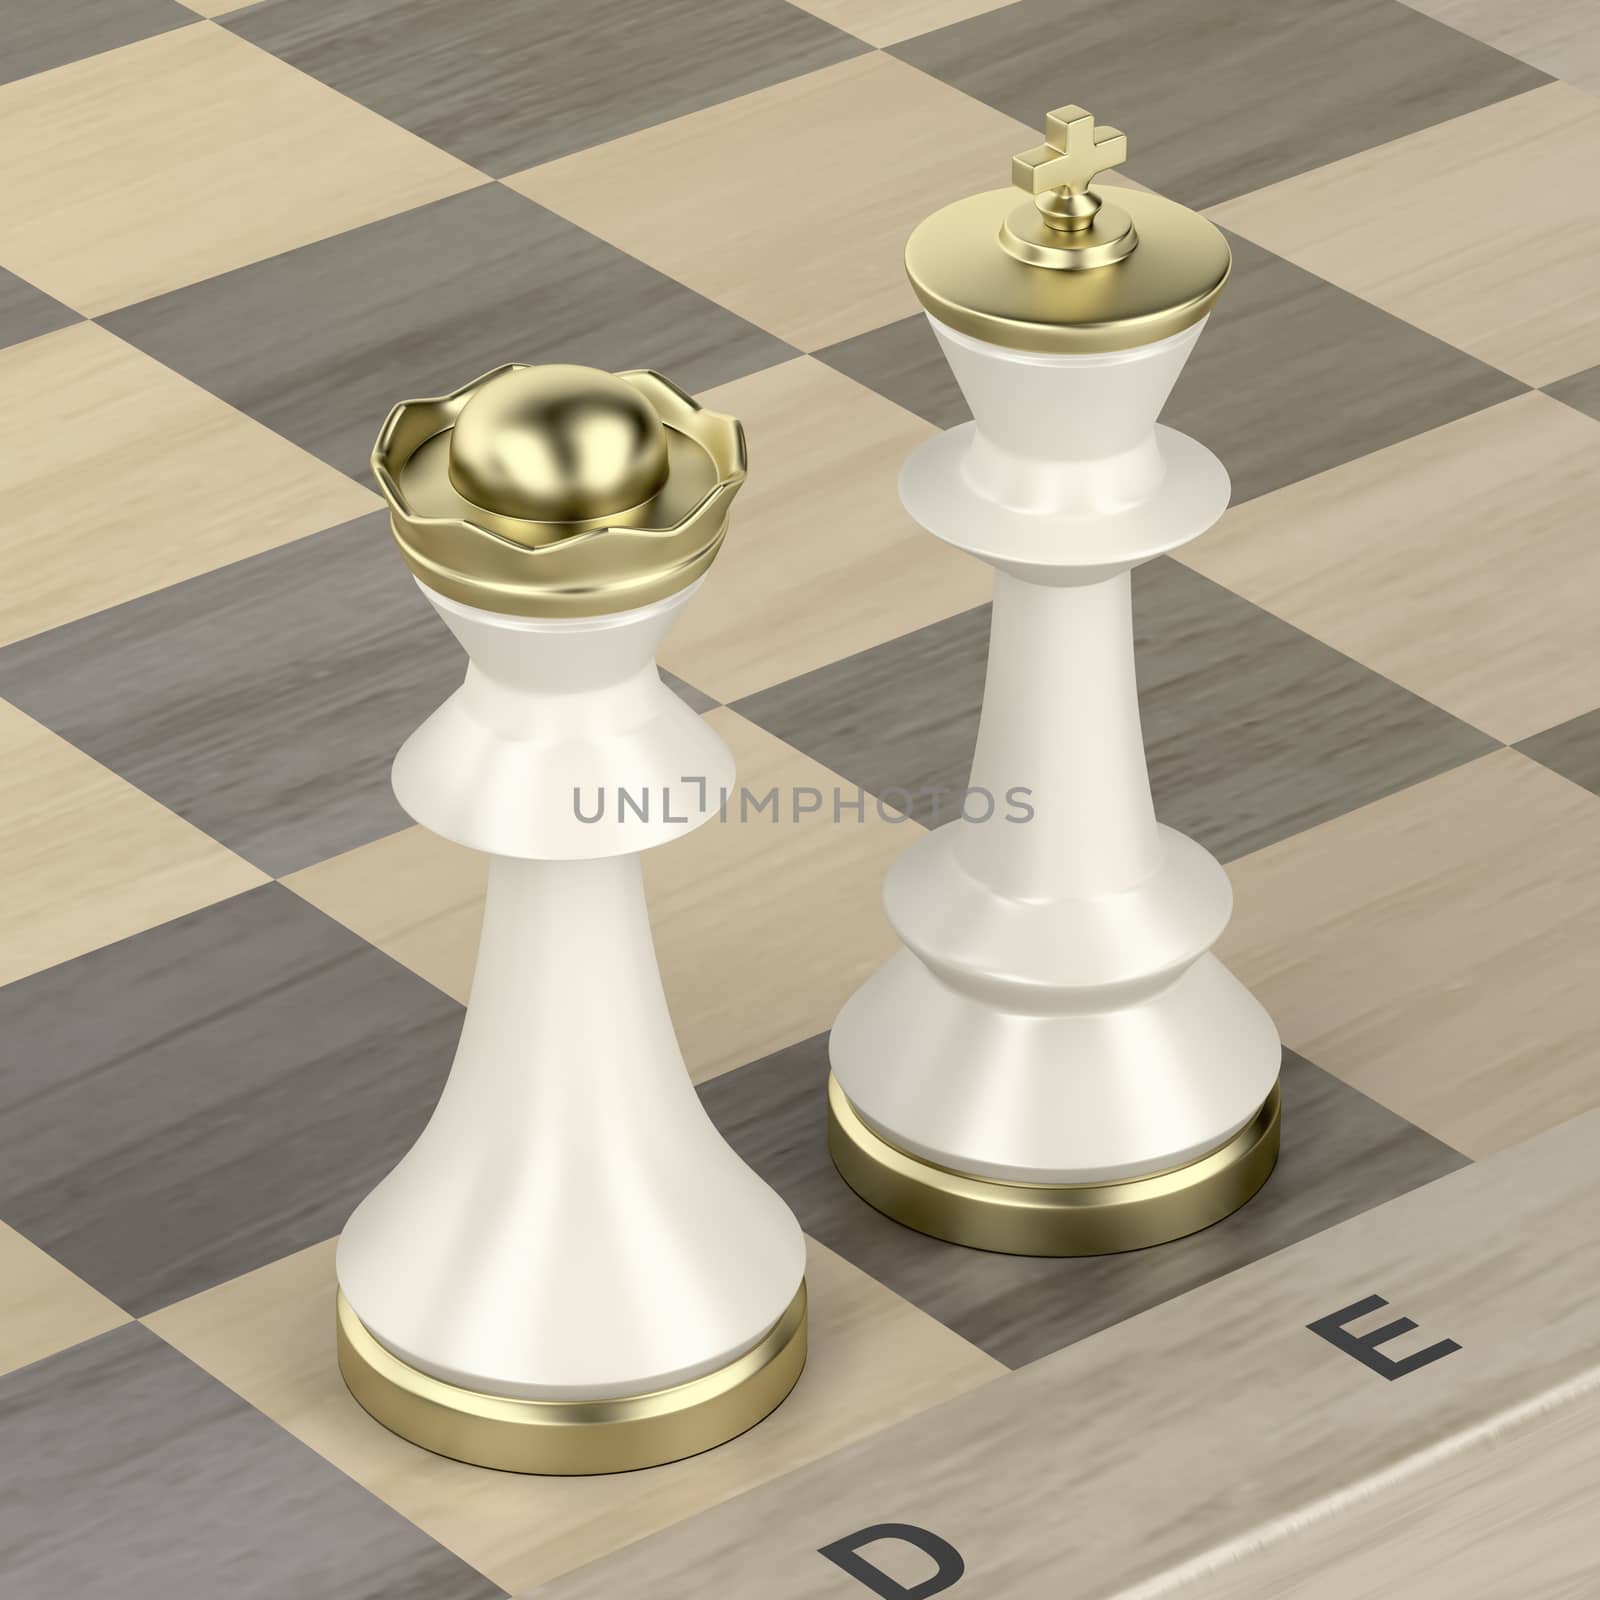 Queen and king chess pieces on chess board by magraphics